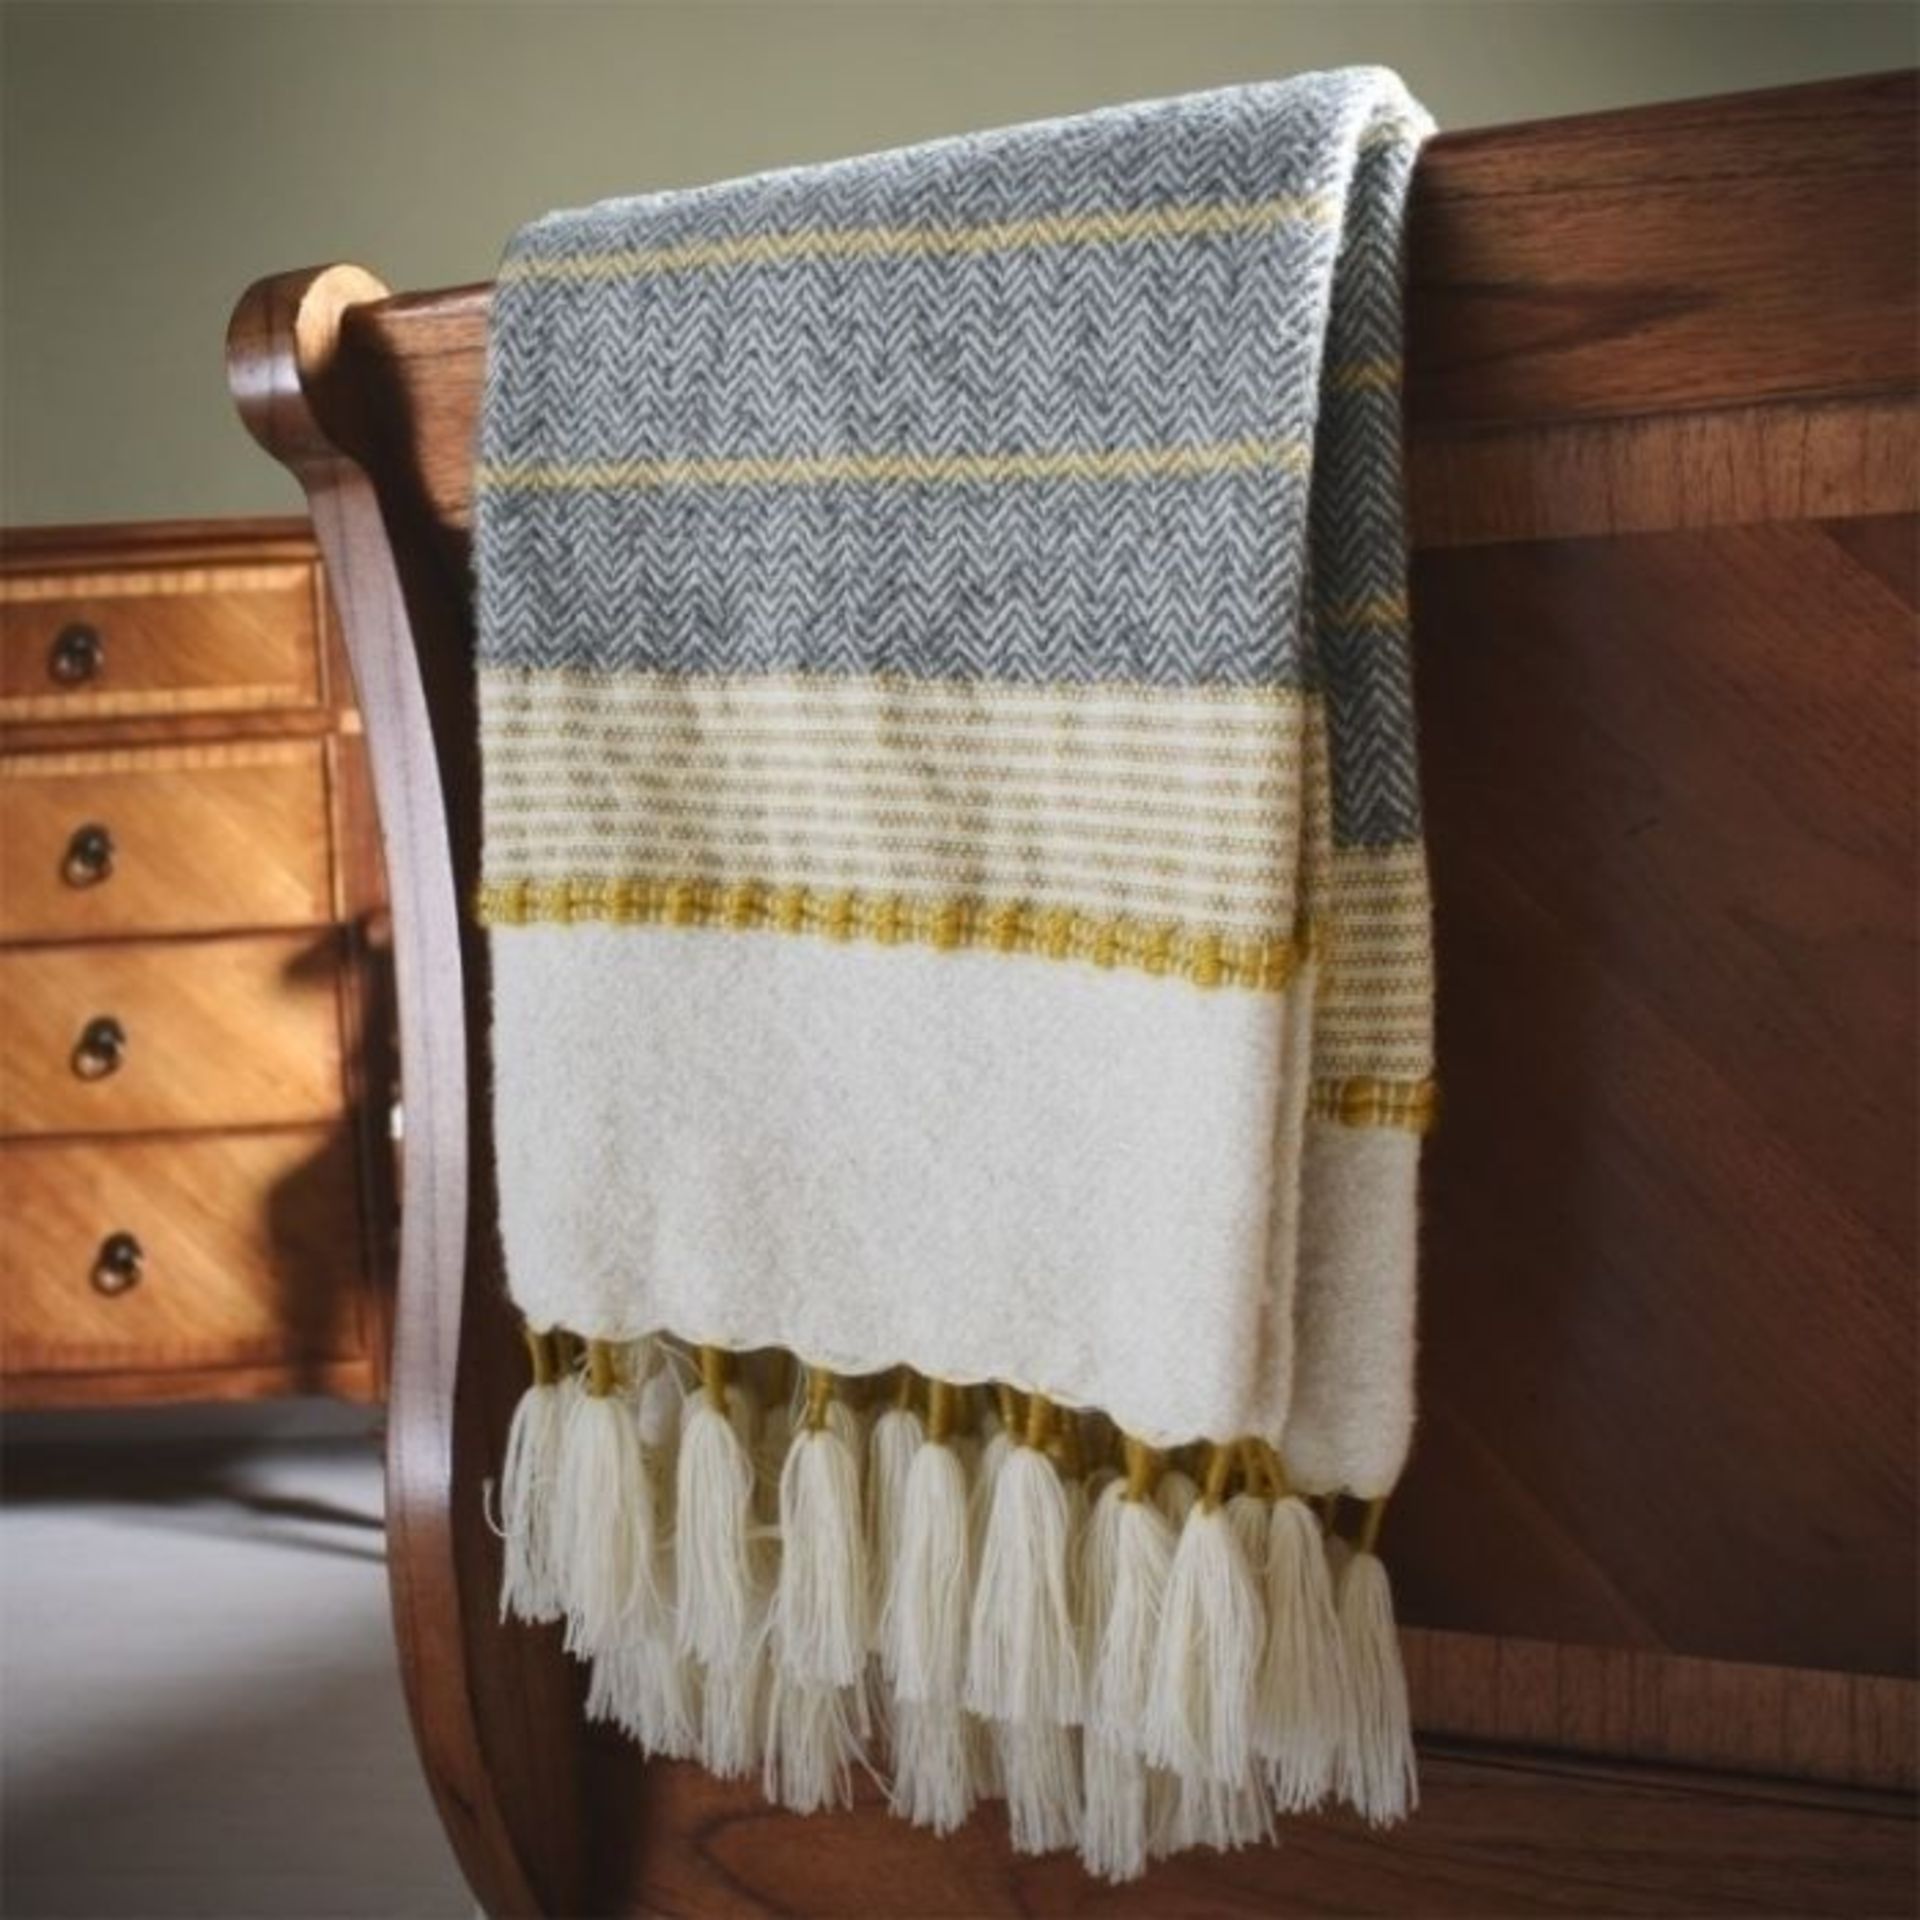 Kasbah Textured Throw Perfect For Covering Chairs Or For Keeping Warm 1700 X 1300mm (5055999239288) - Image 2 of 2